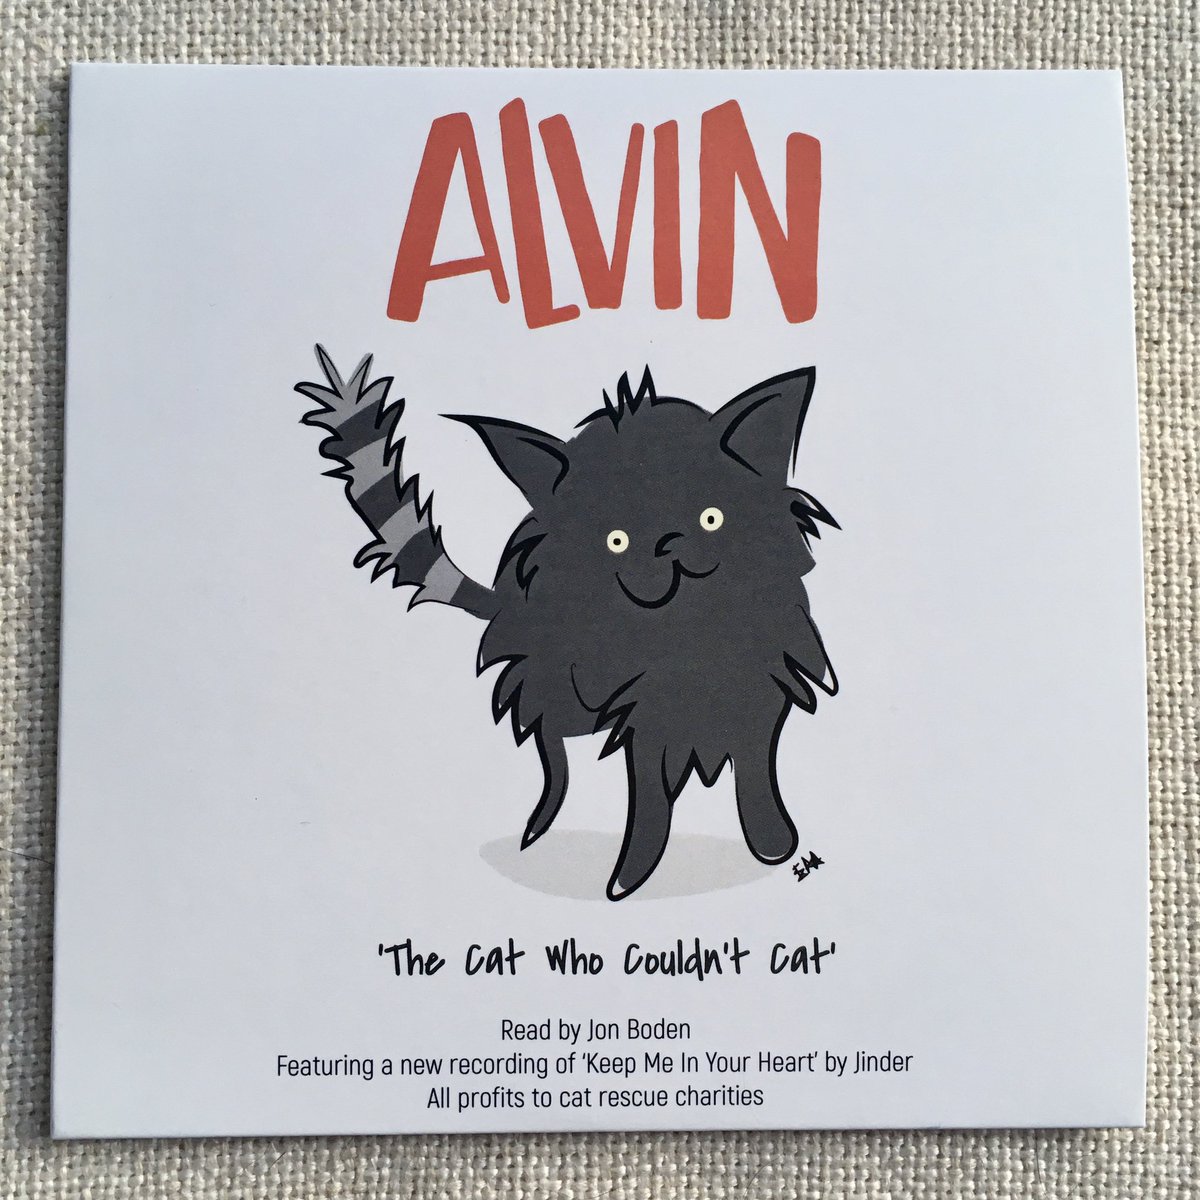 If anyone is at a loose end in Sheffield on Sunday afternoon, pop down to @cutleryworks where there’s a pet-themed fair.
I’ll have a stall selling the Alvin book, cd and merch. All profits to Sheffield cat charities.
@SkewSmug @CoachTChesters @BrotherShaunEPB @SHEFFALCAMPBELL